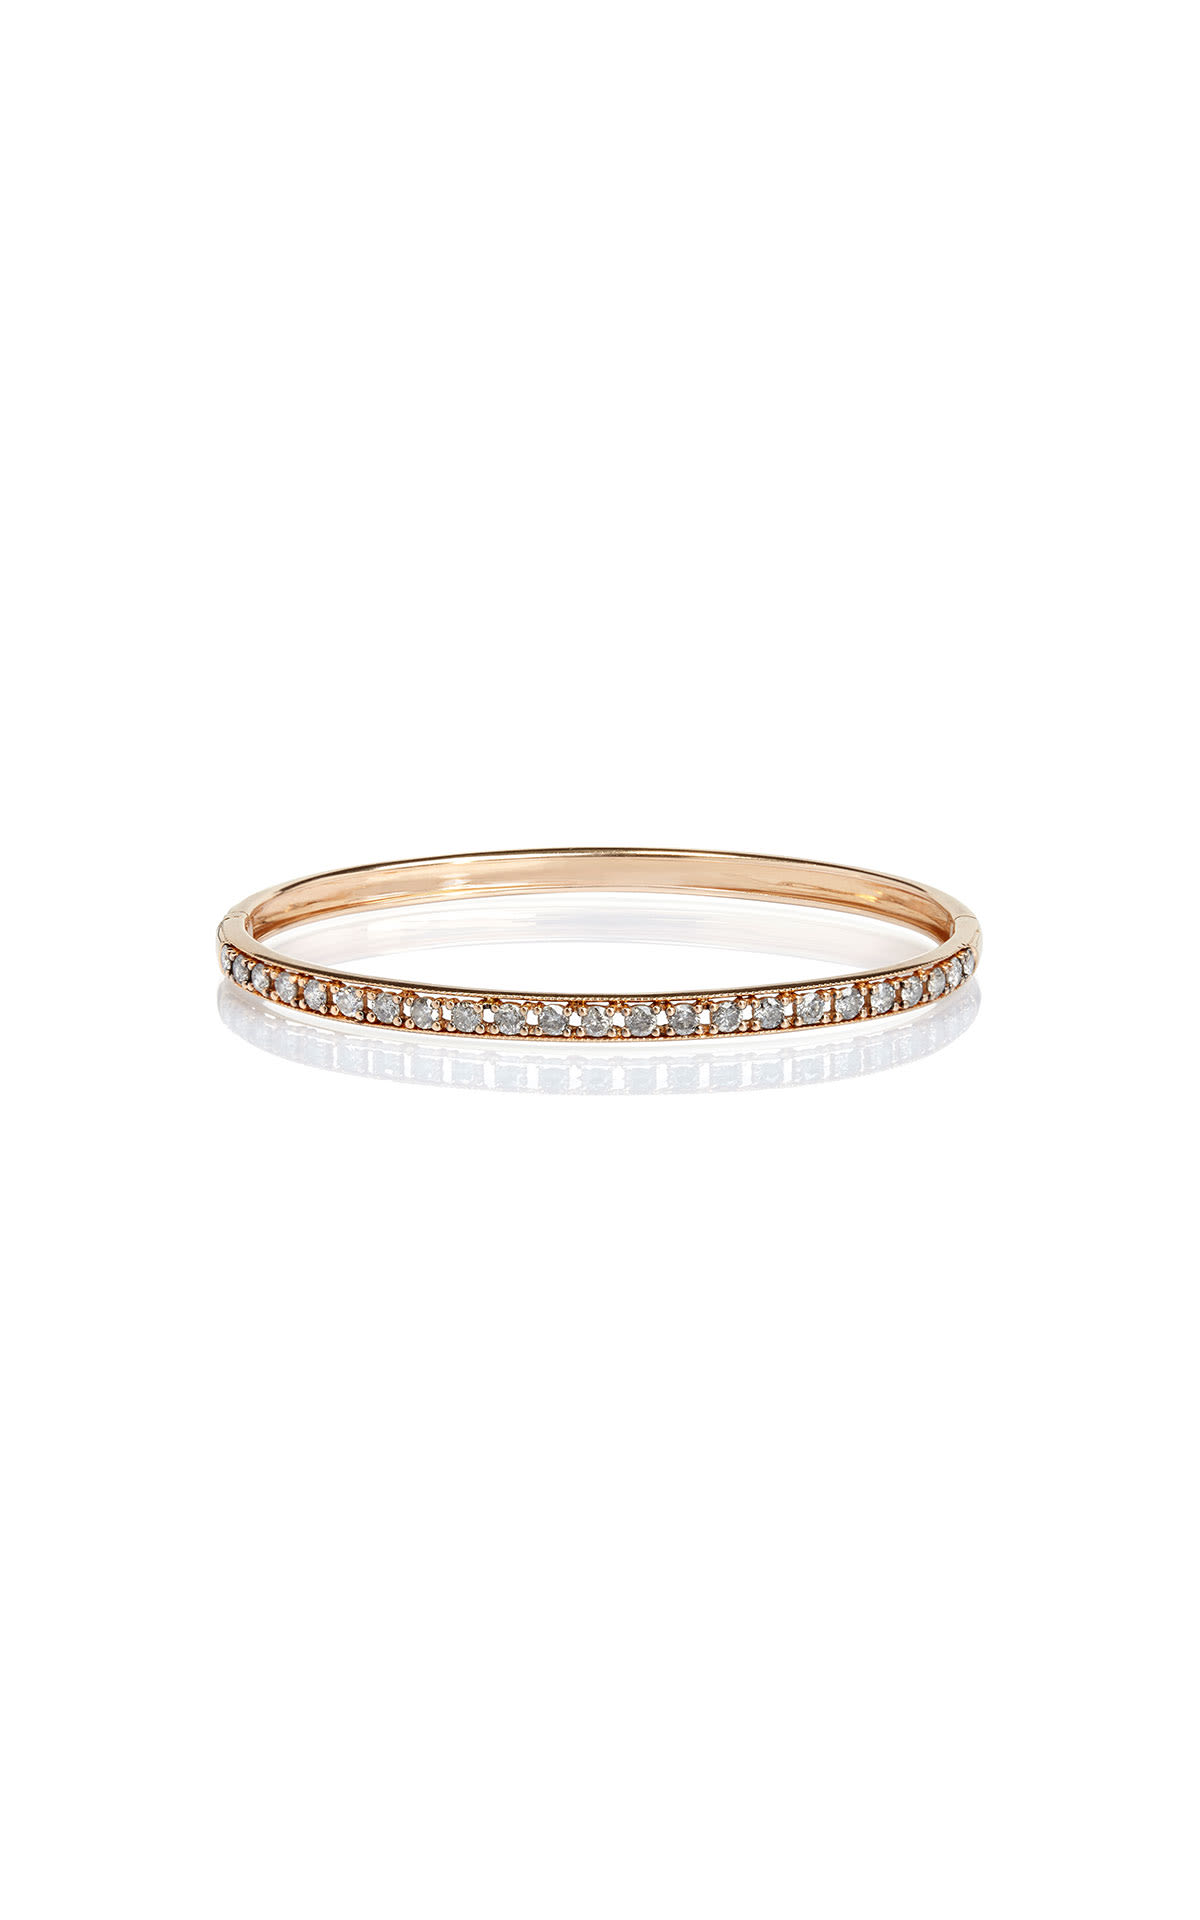 Annoushka Dusty diamond line bangle 18ct rose gold from Bicester Village